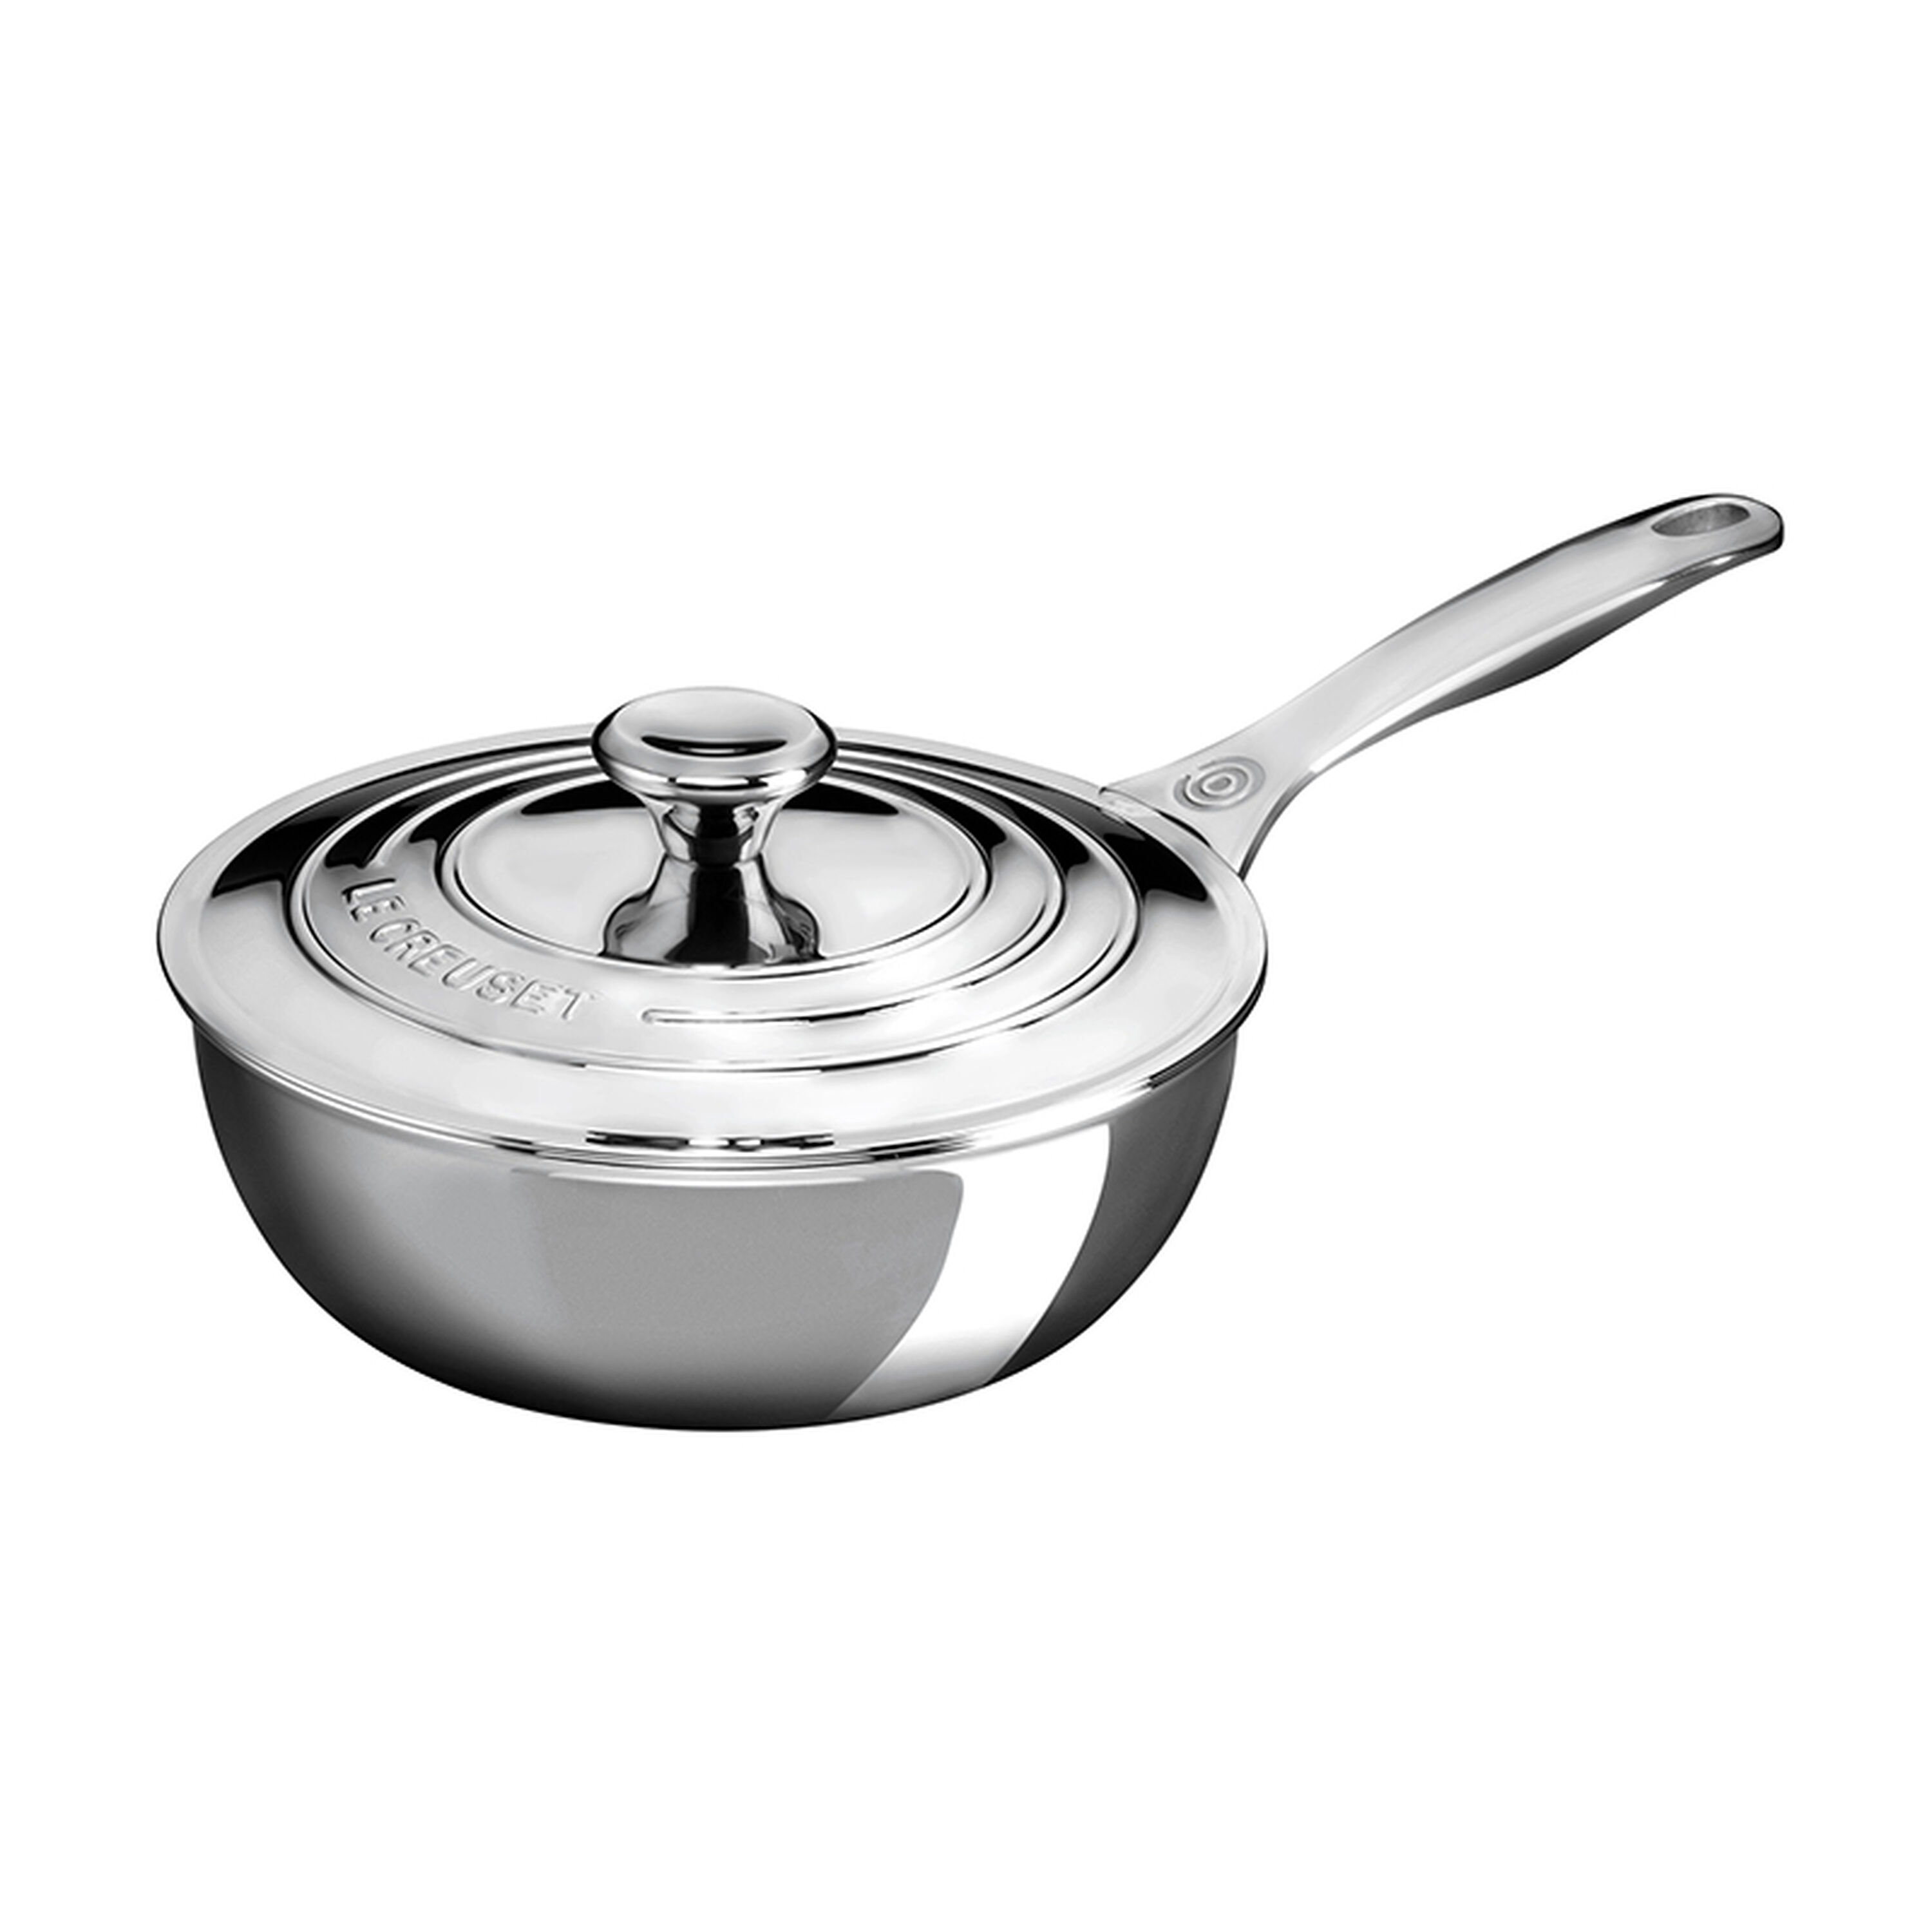 Le Creuset Stainless Steel 12 Frying Pan for sale online